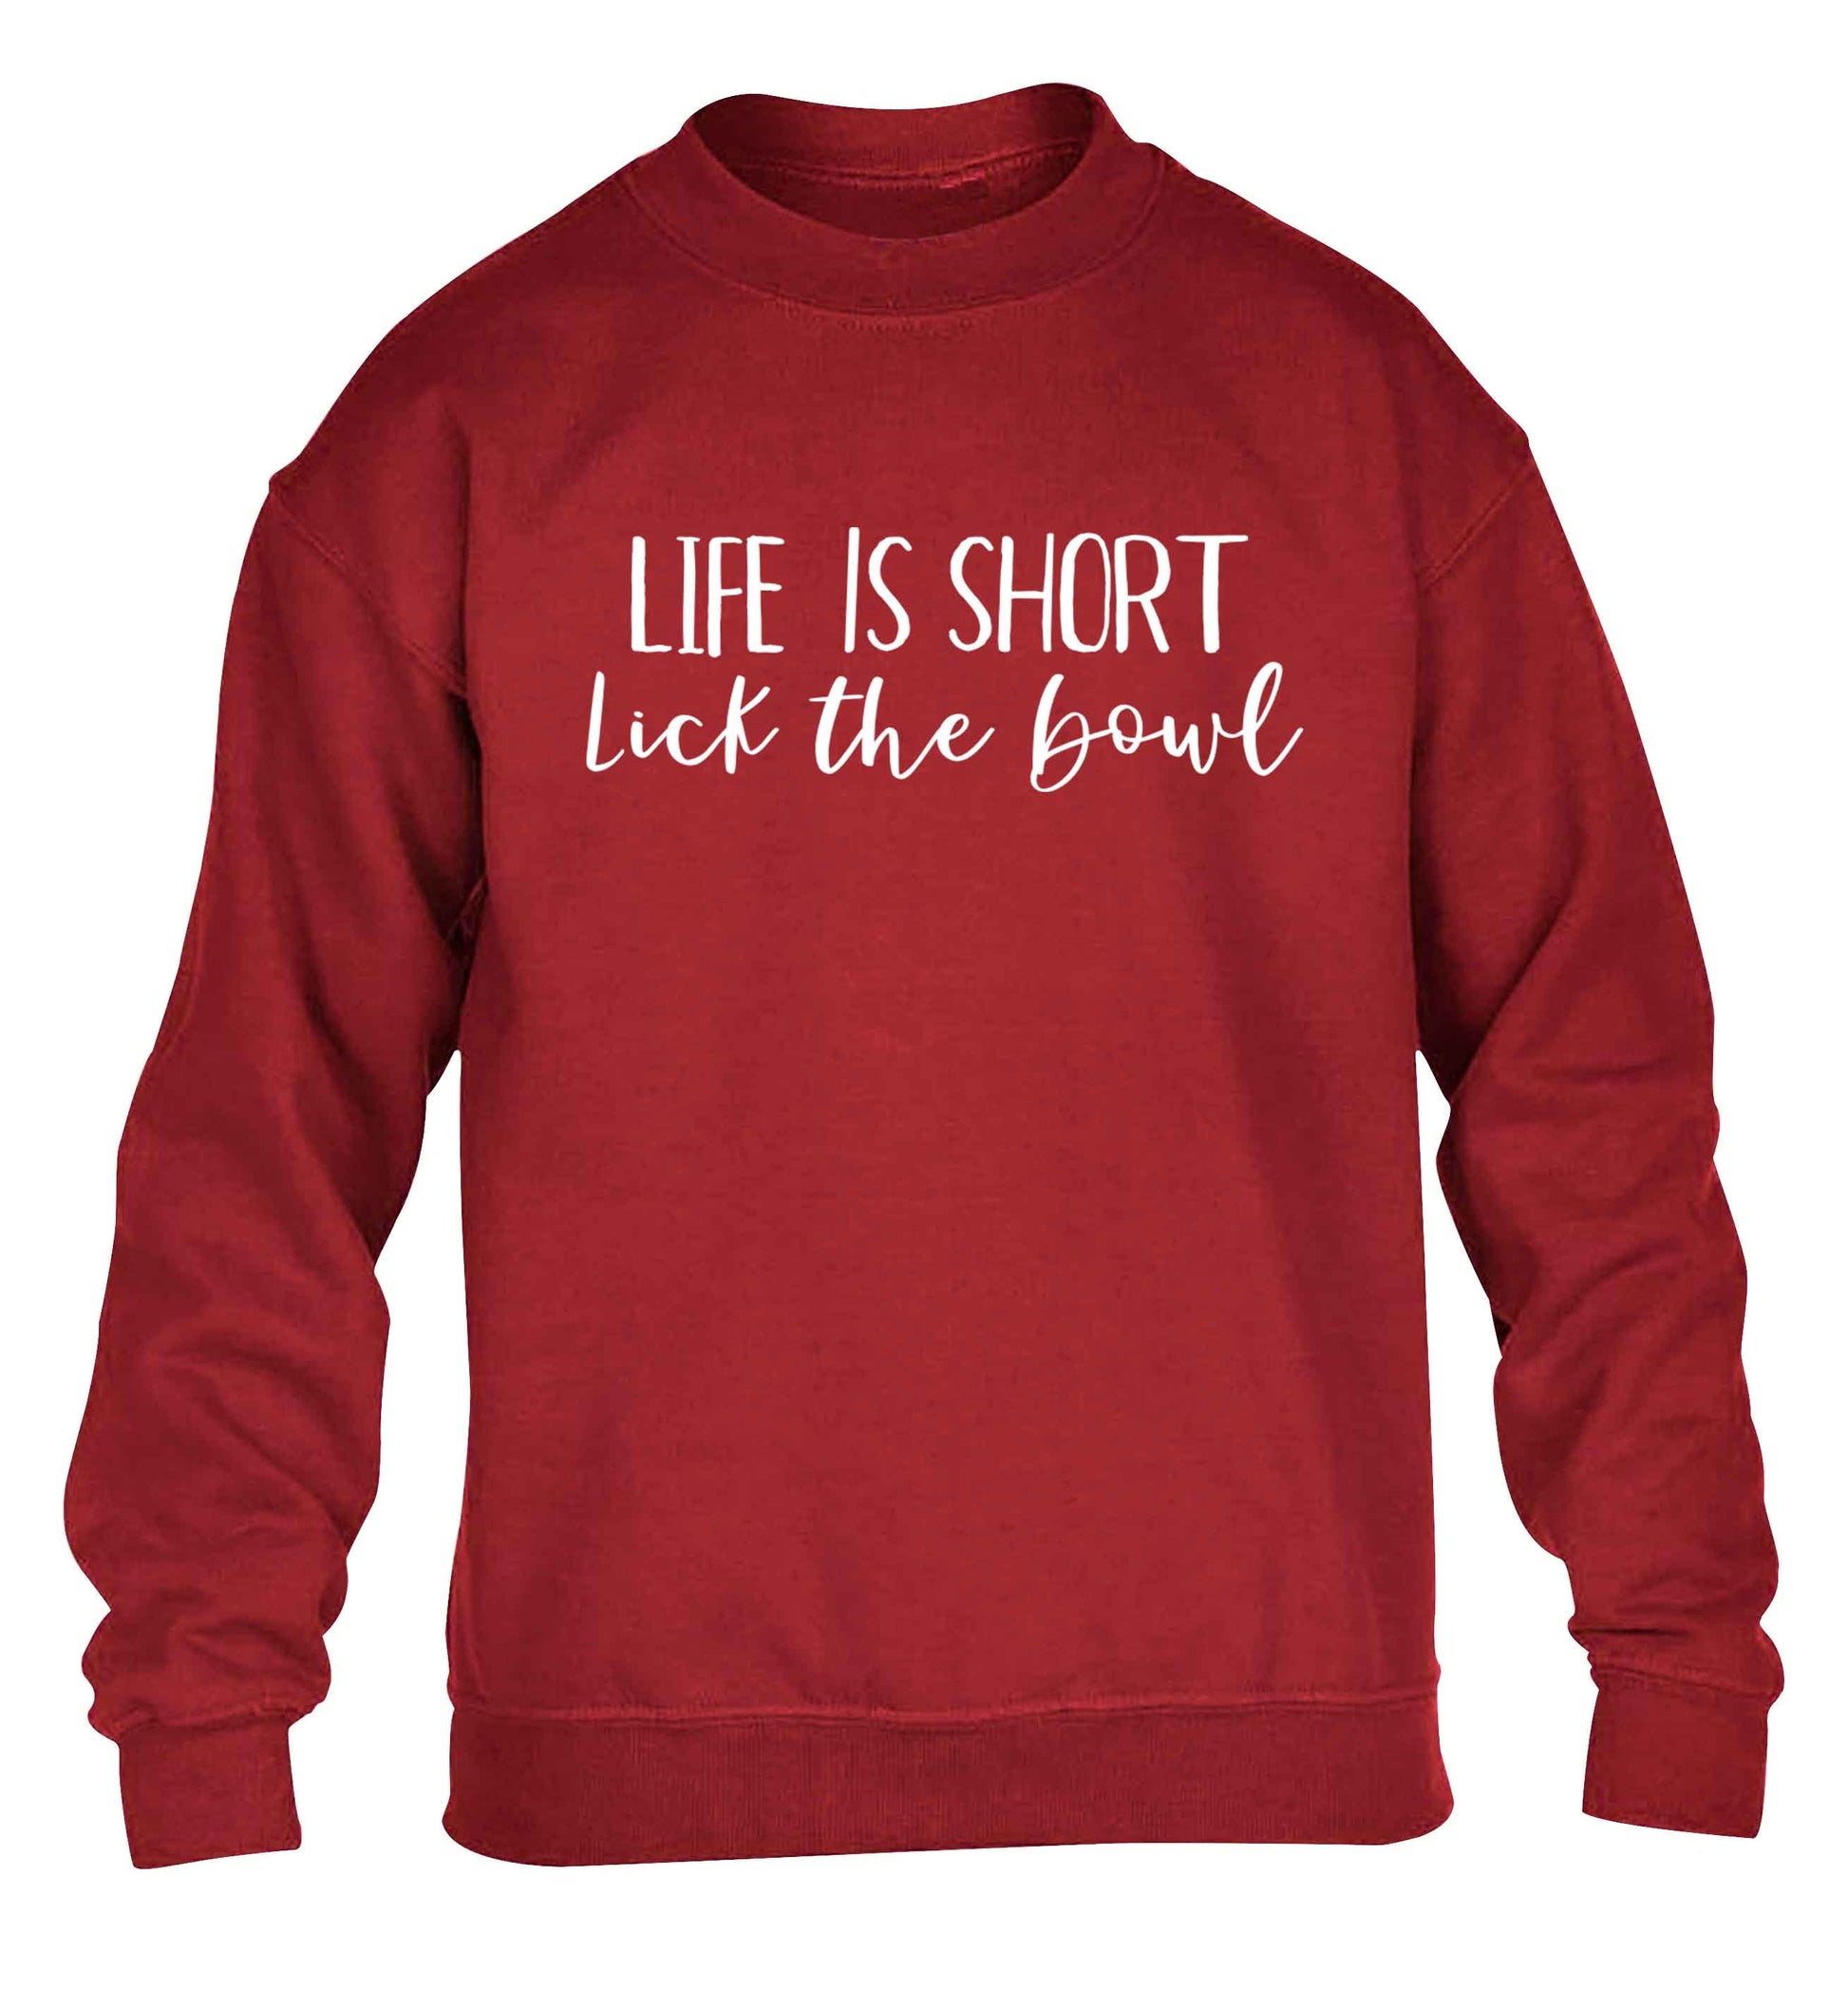 Life is short lick the bowl children's grey sweater 12-13 Years